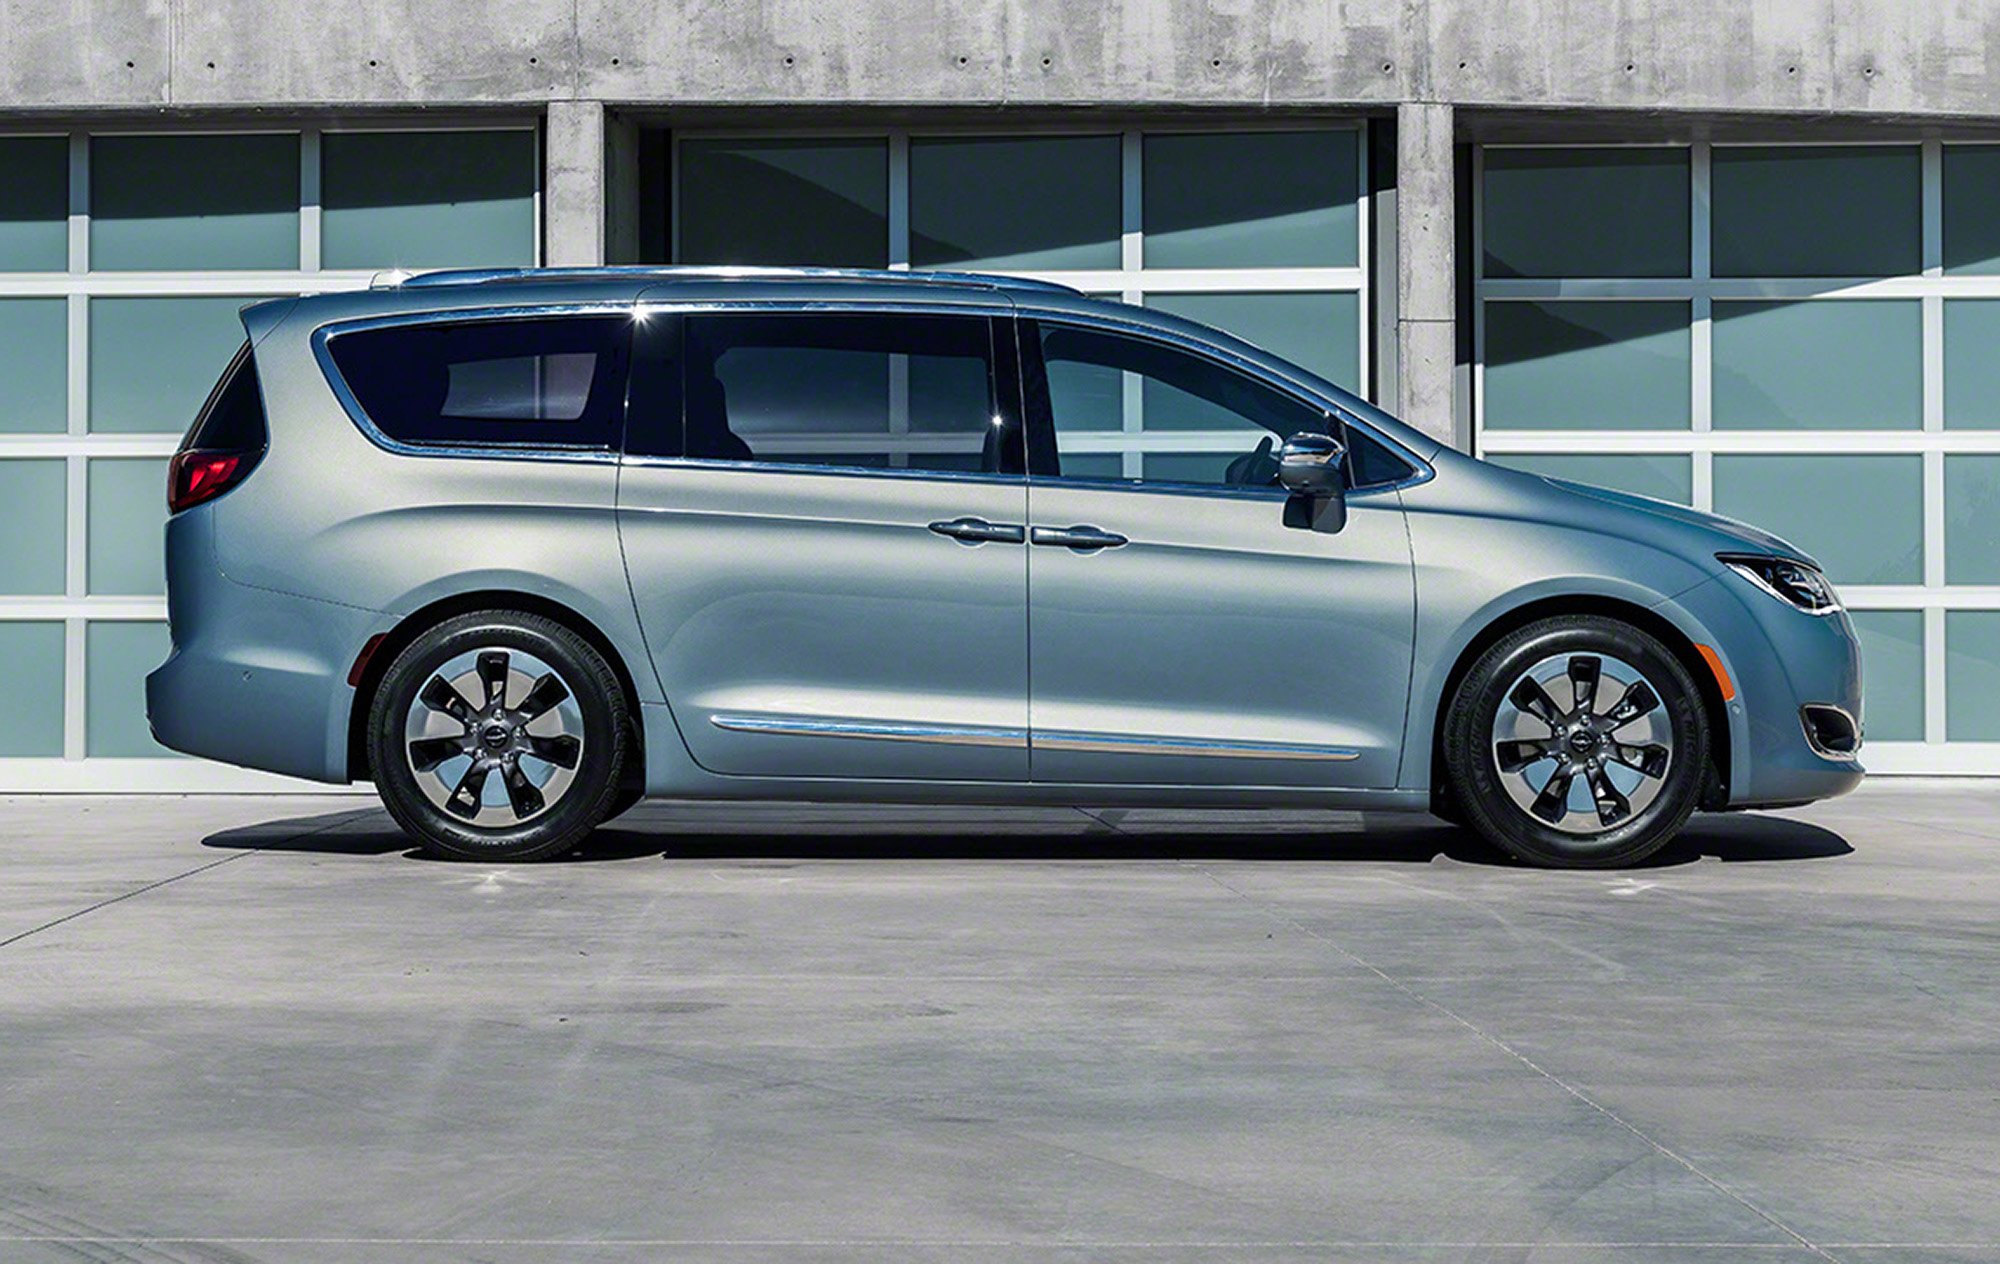 2016 Chrysler Pacifica Grand Voyager replacement appears